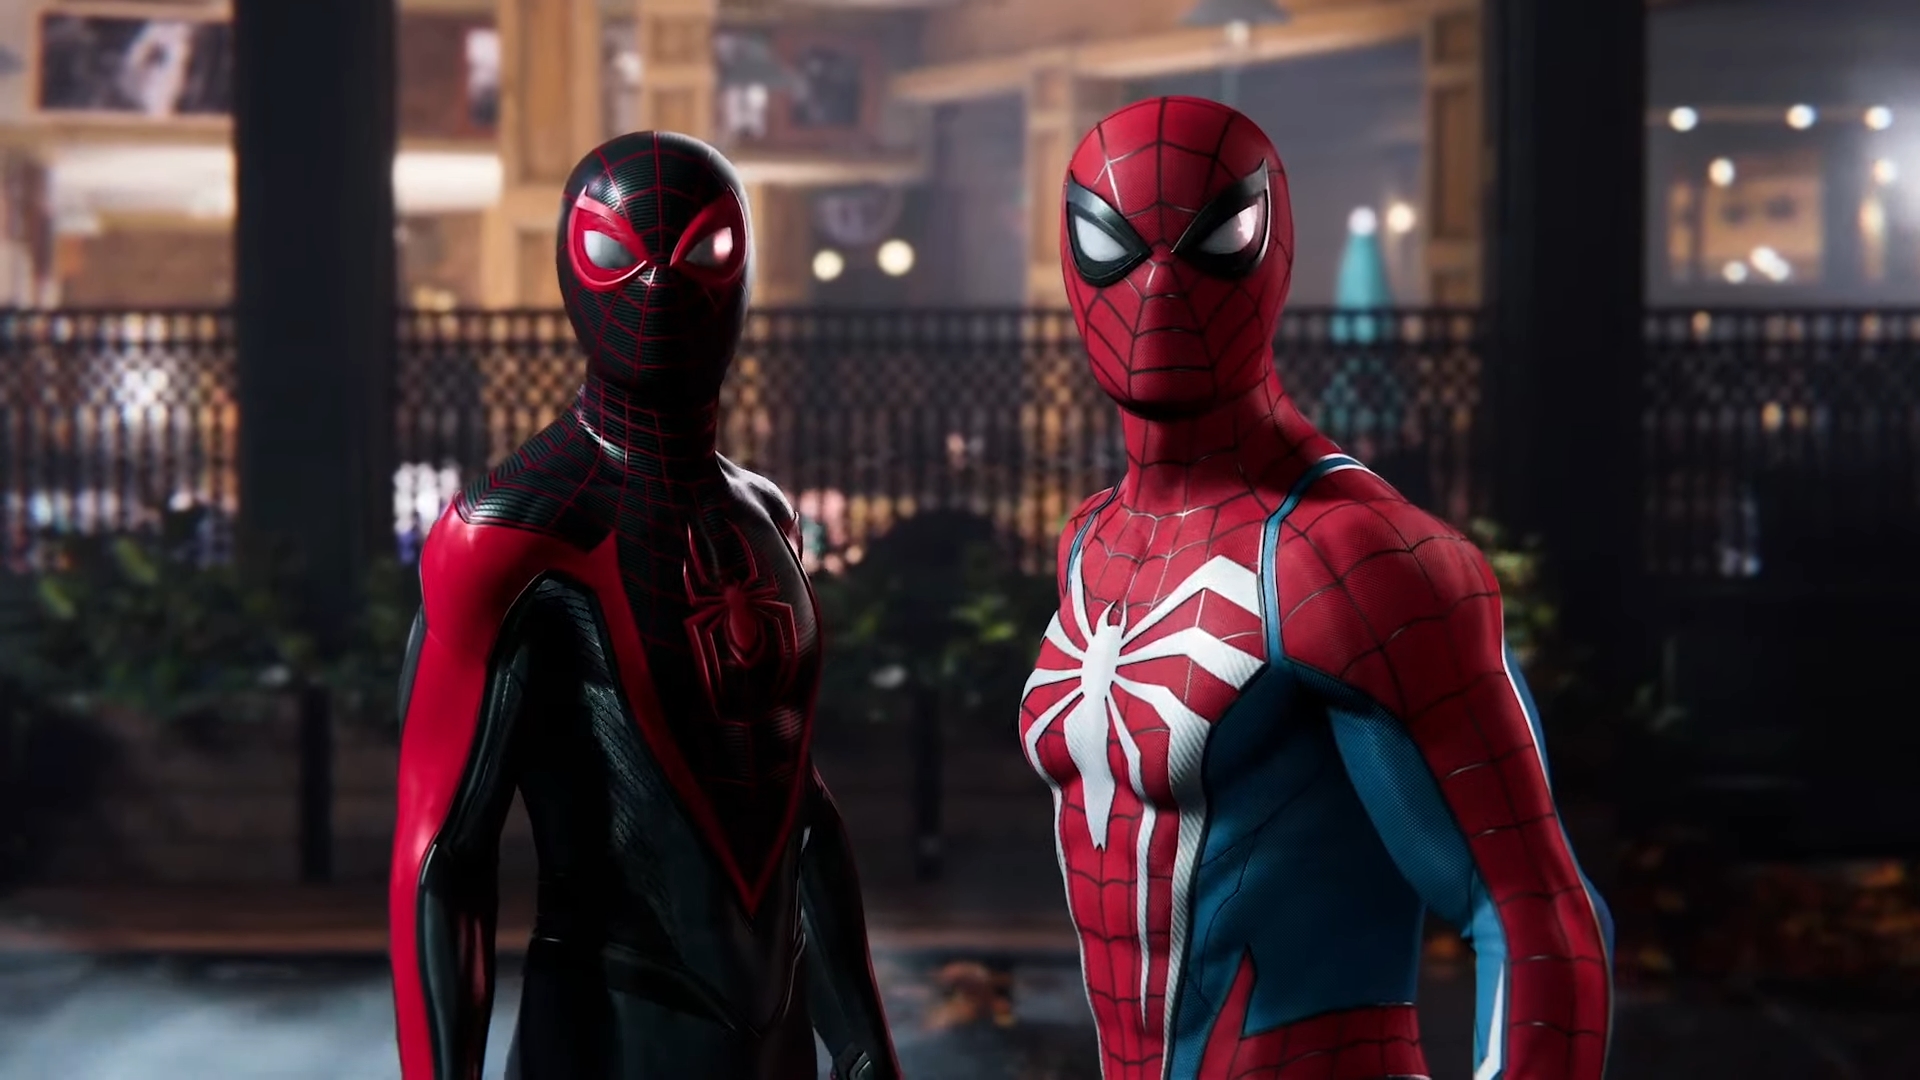 Screenshot of Marvel's Spider-Man 2 showing Peter Parker and Miles Morales side by side in their respective Spider-Man costumes